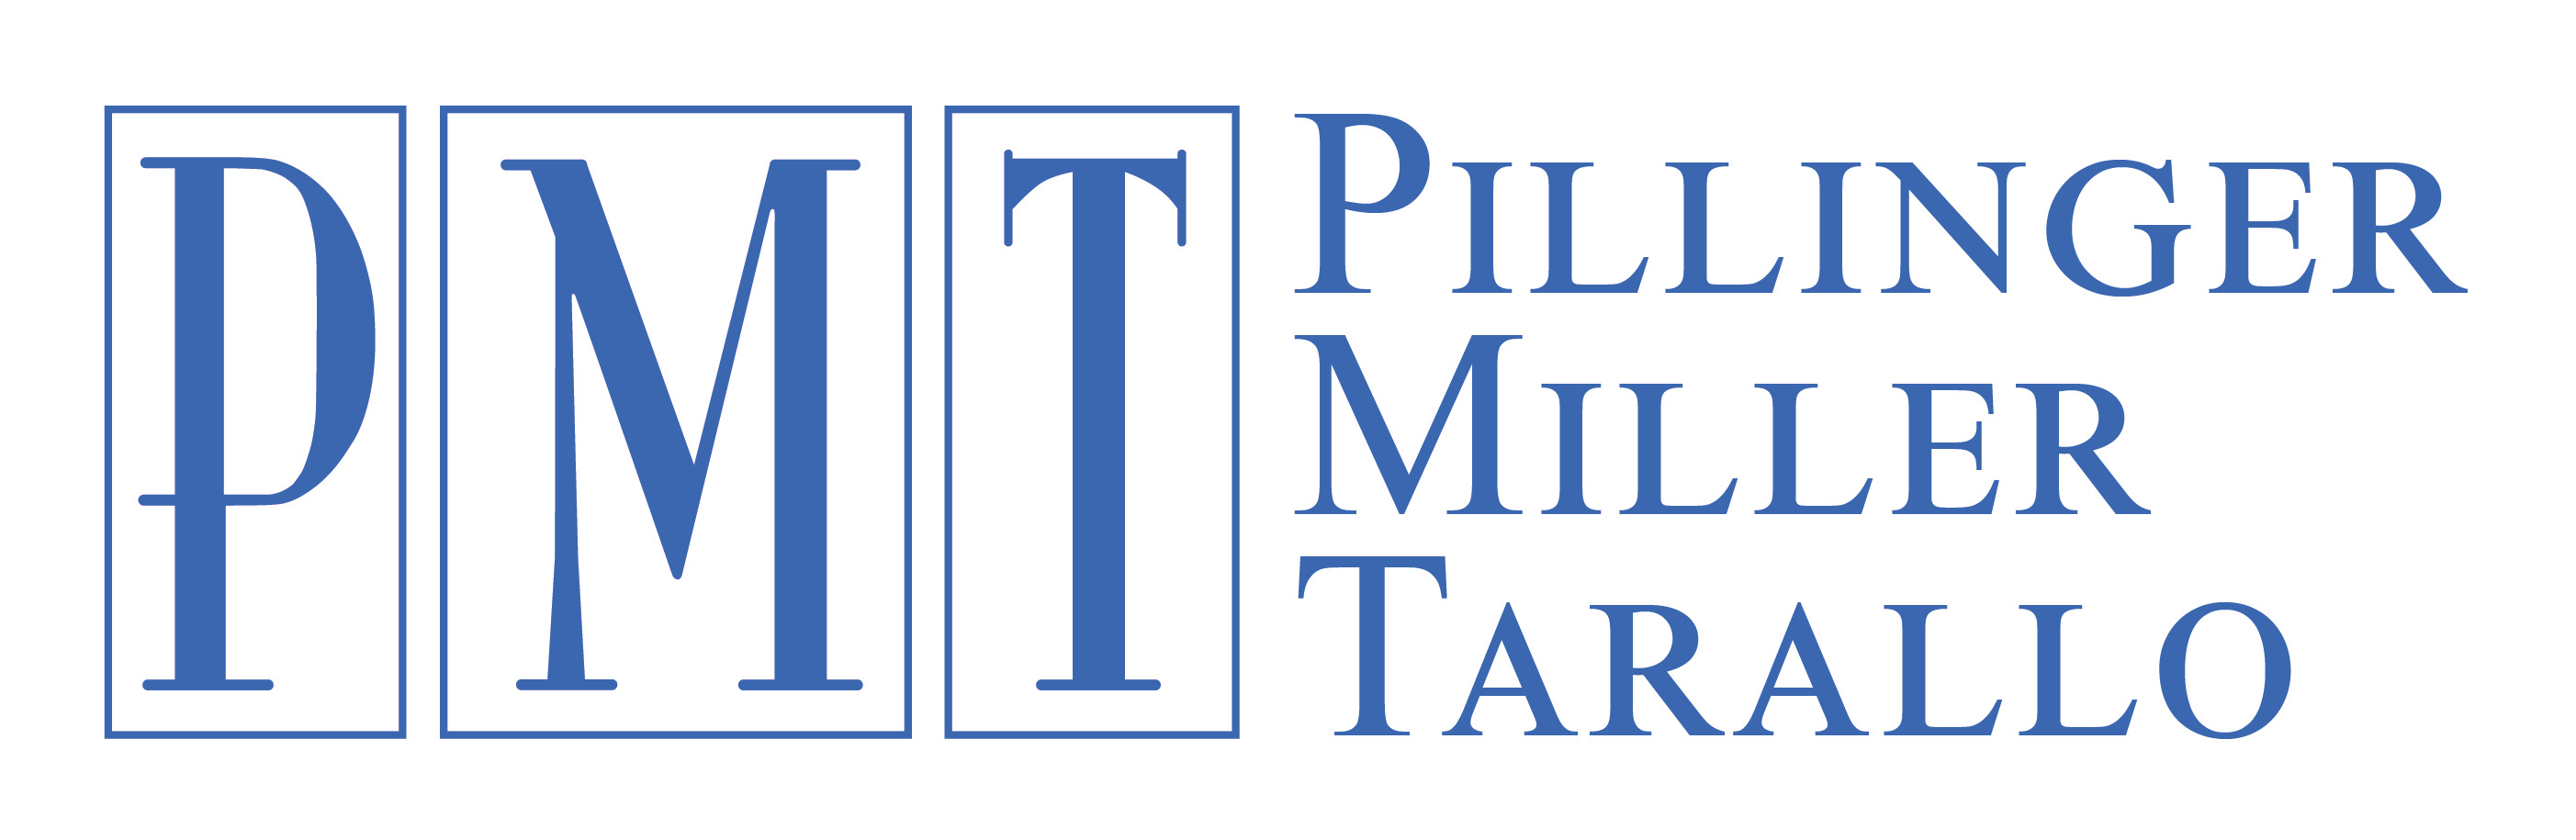 Pillinger Miller Tarallo Announces New Location and Two New Attorneys